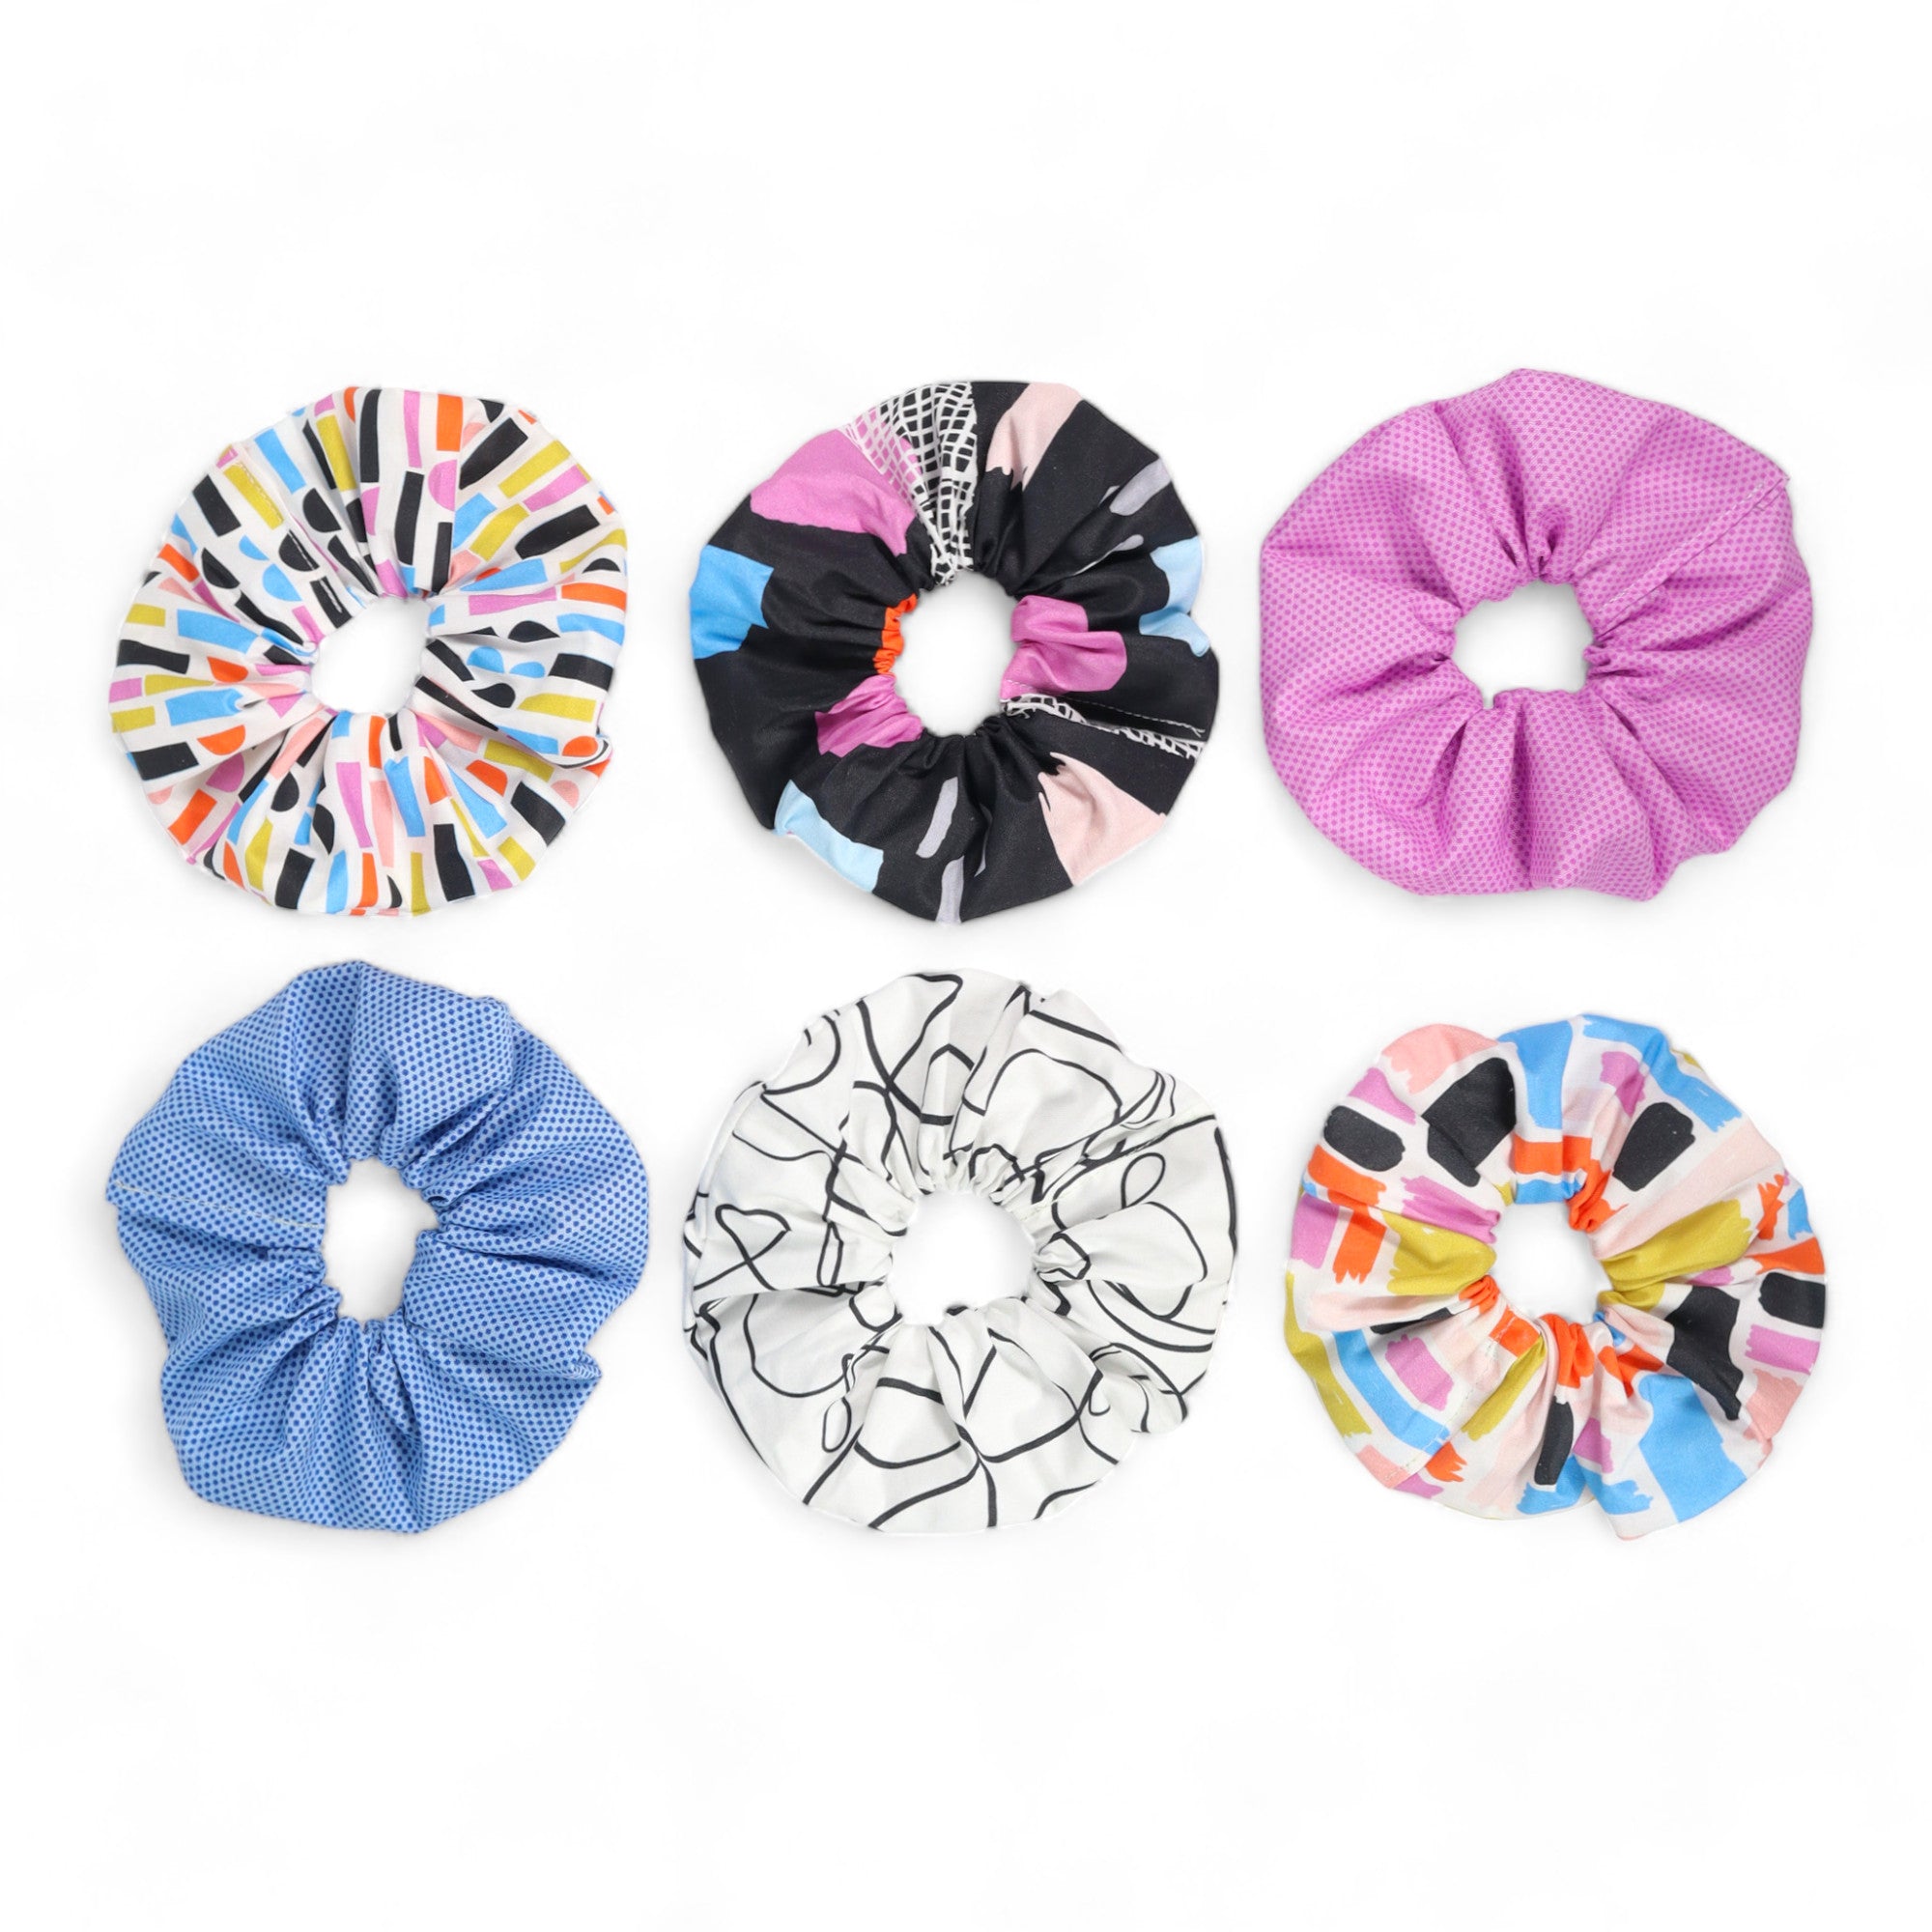 Crosscut Sewing Co. Scrunchie Sewing Kit - Abstract Black